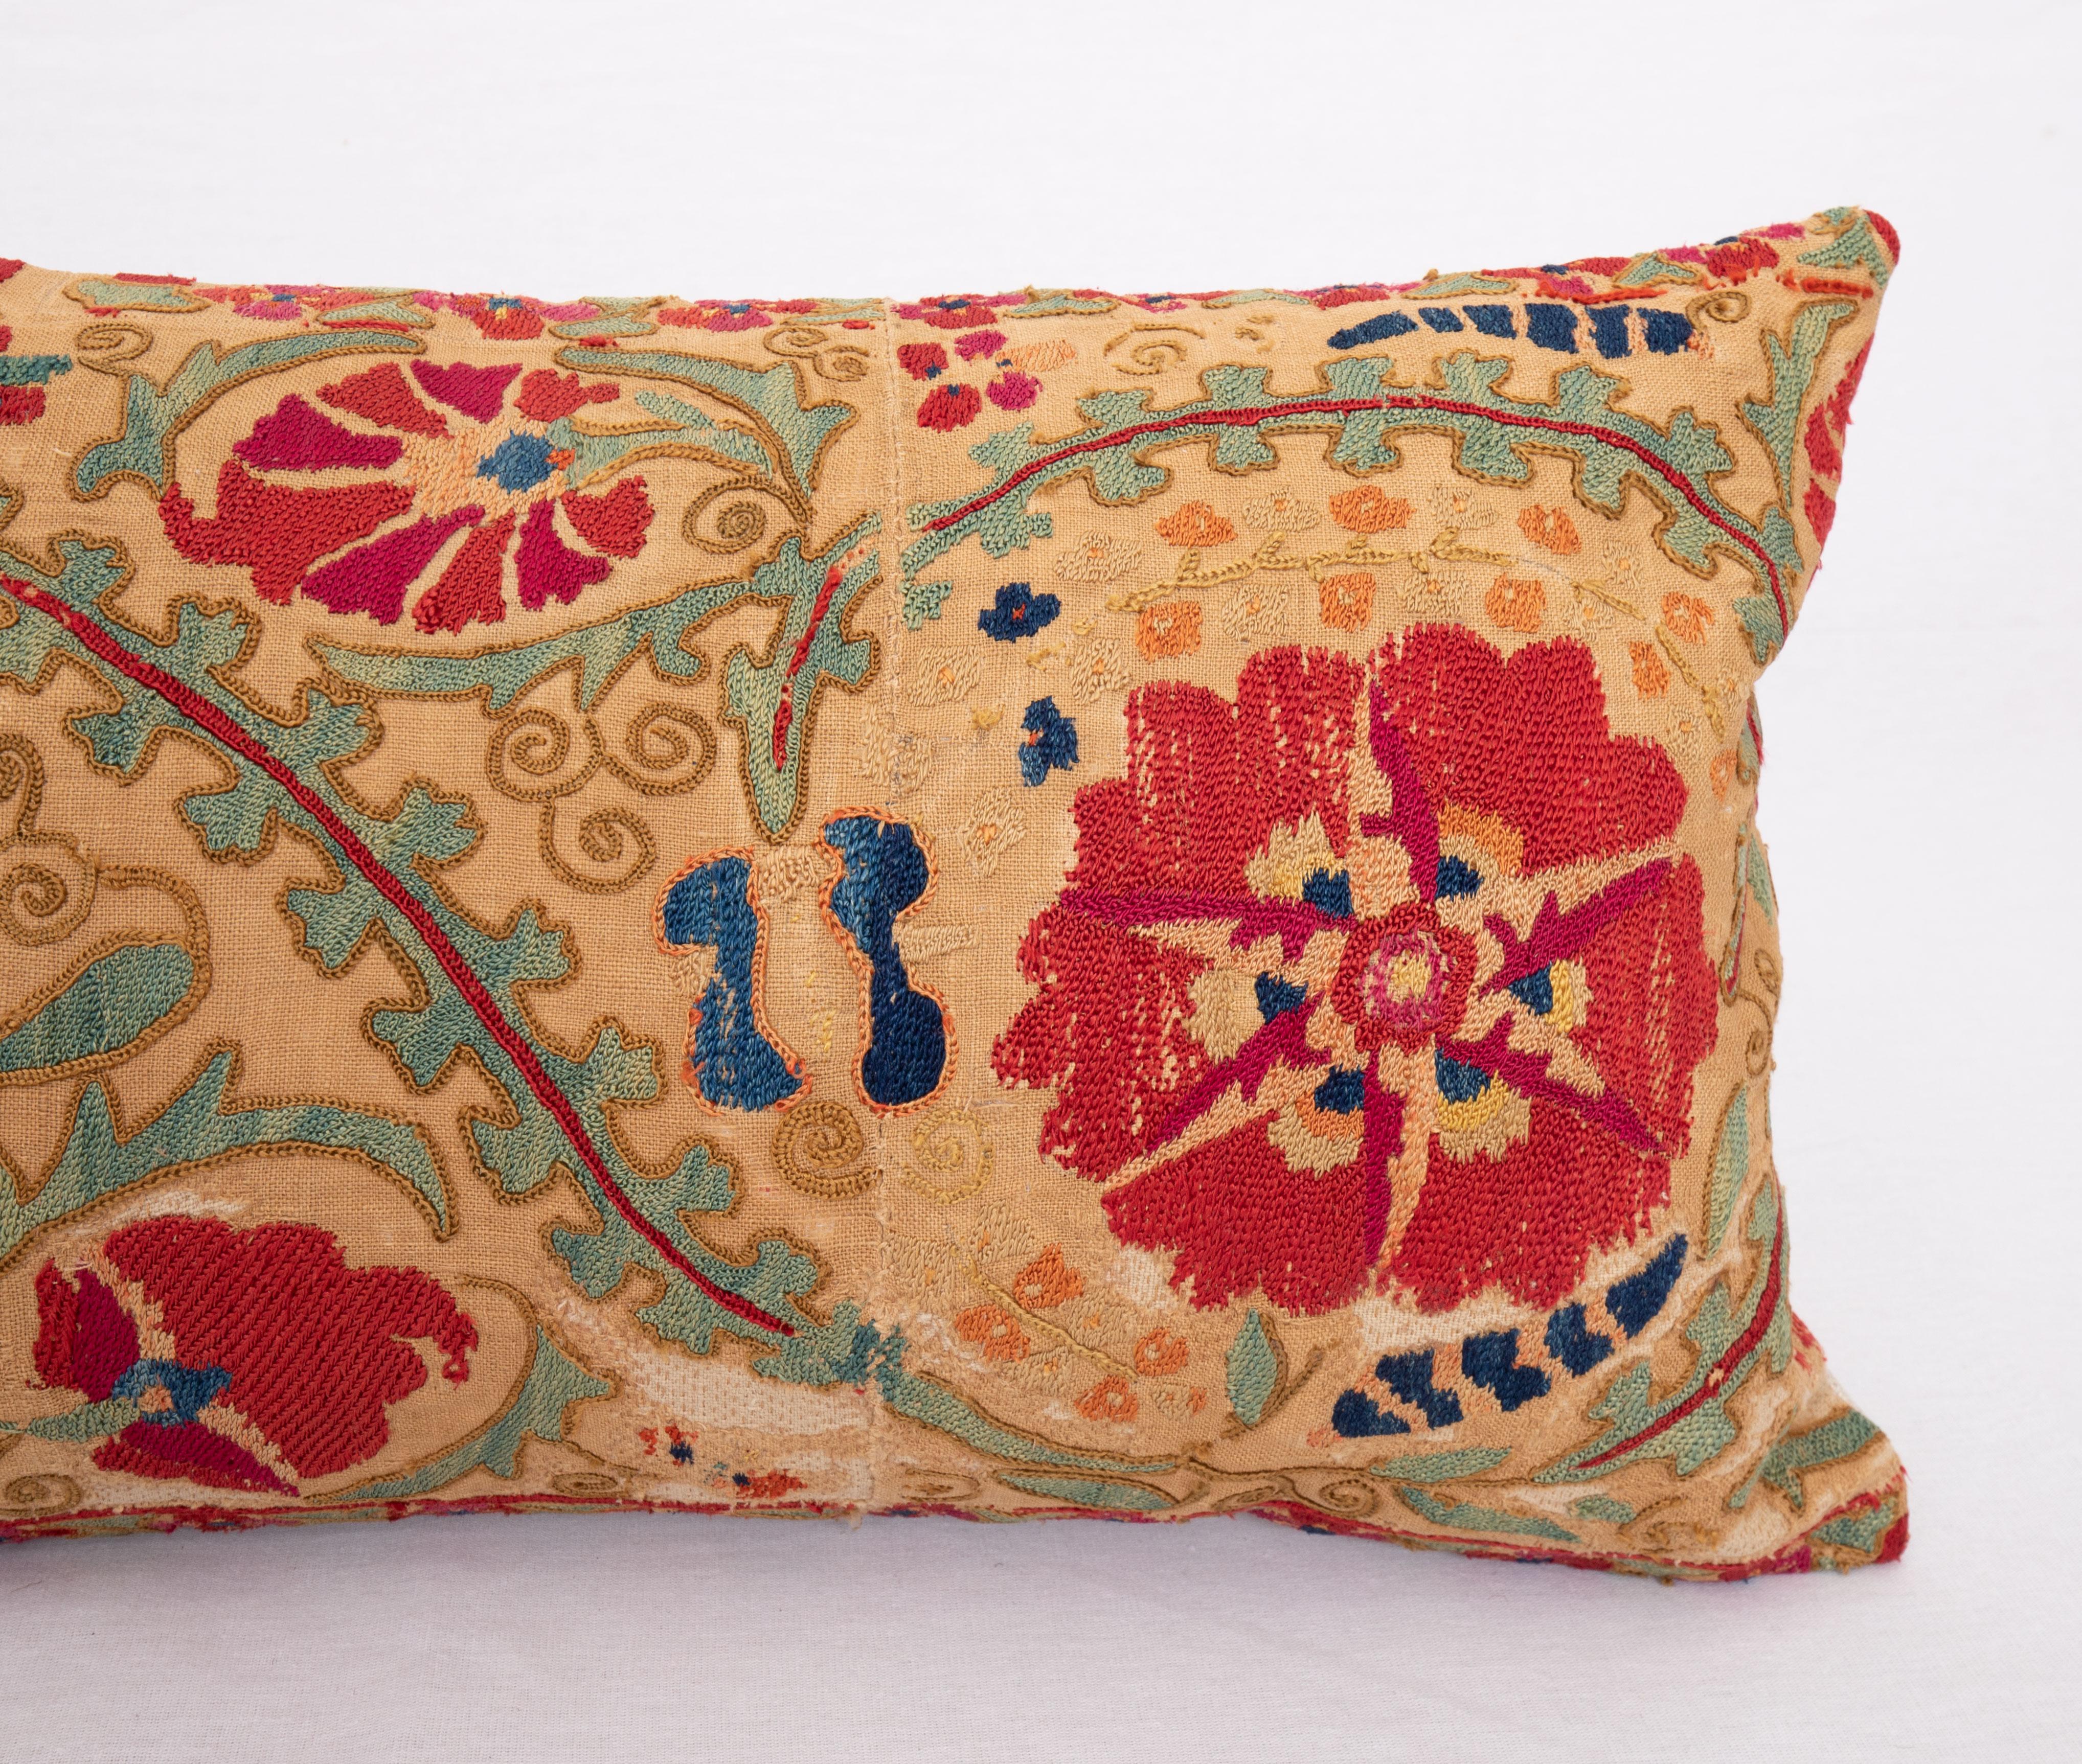 Embroidered Suzani Pillow Case Made from an Antique Suzani Fragment, 19th Century